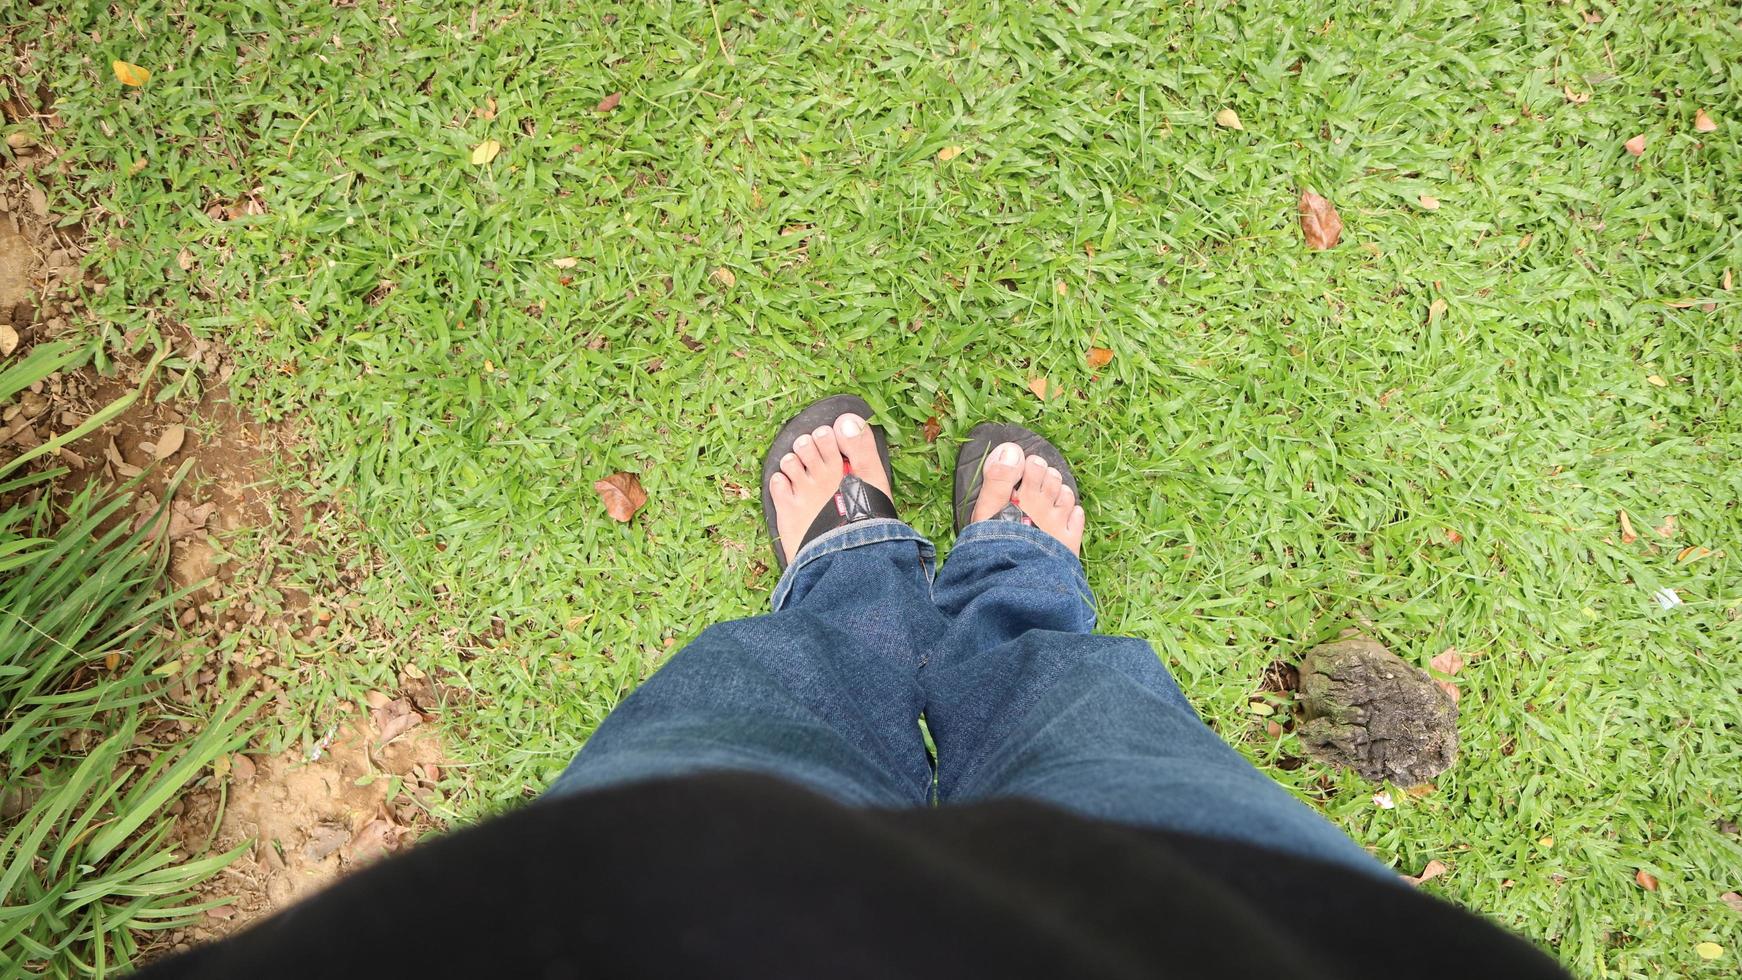 Relax and take off your sandals on the green and fresh grass photo